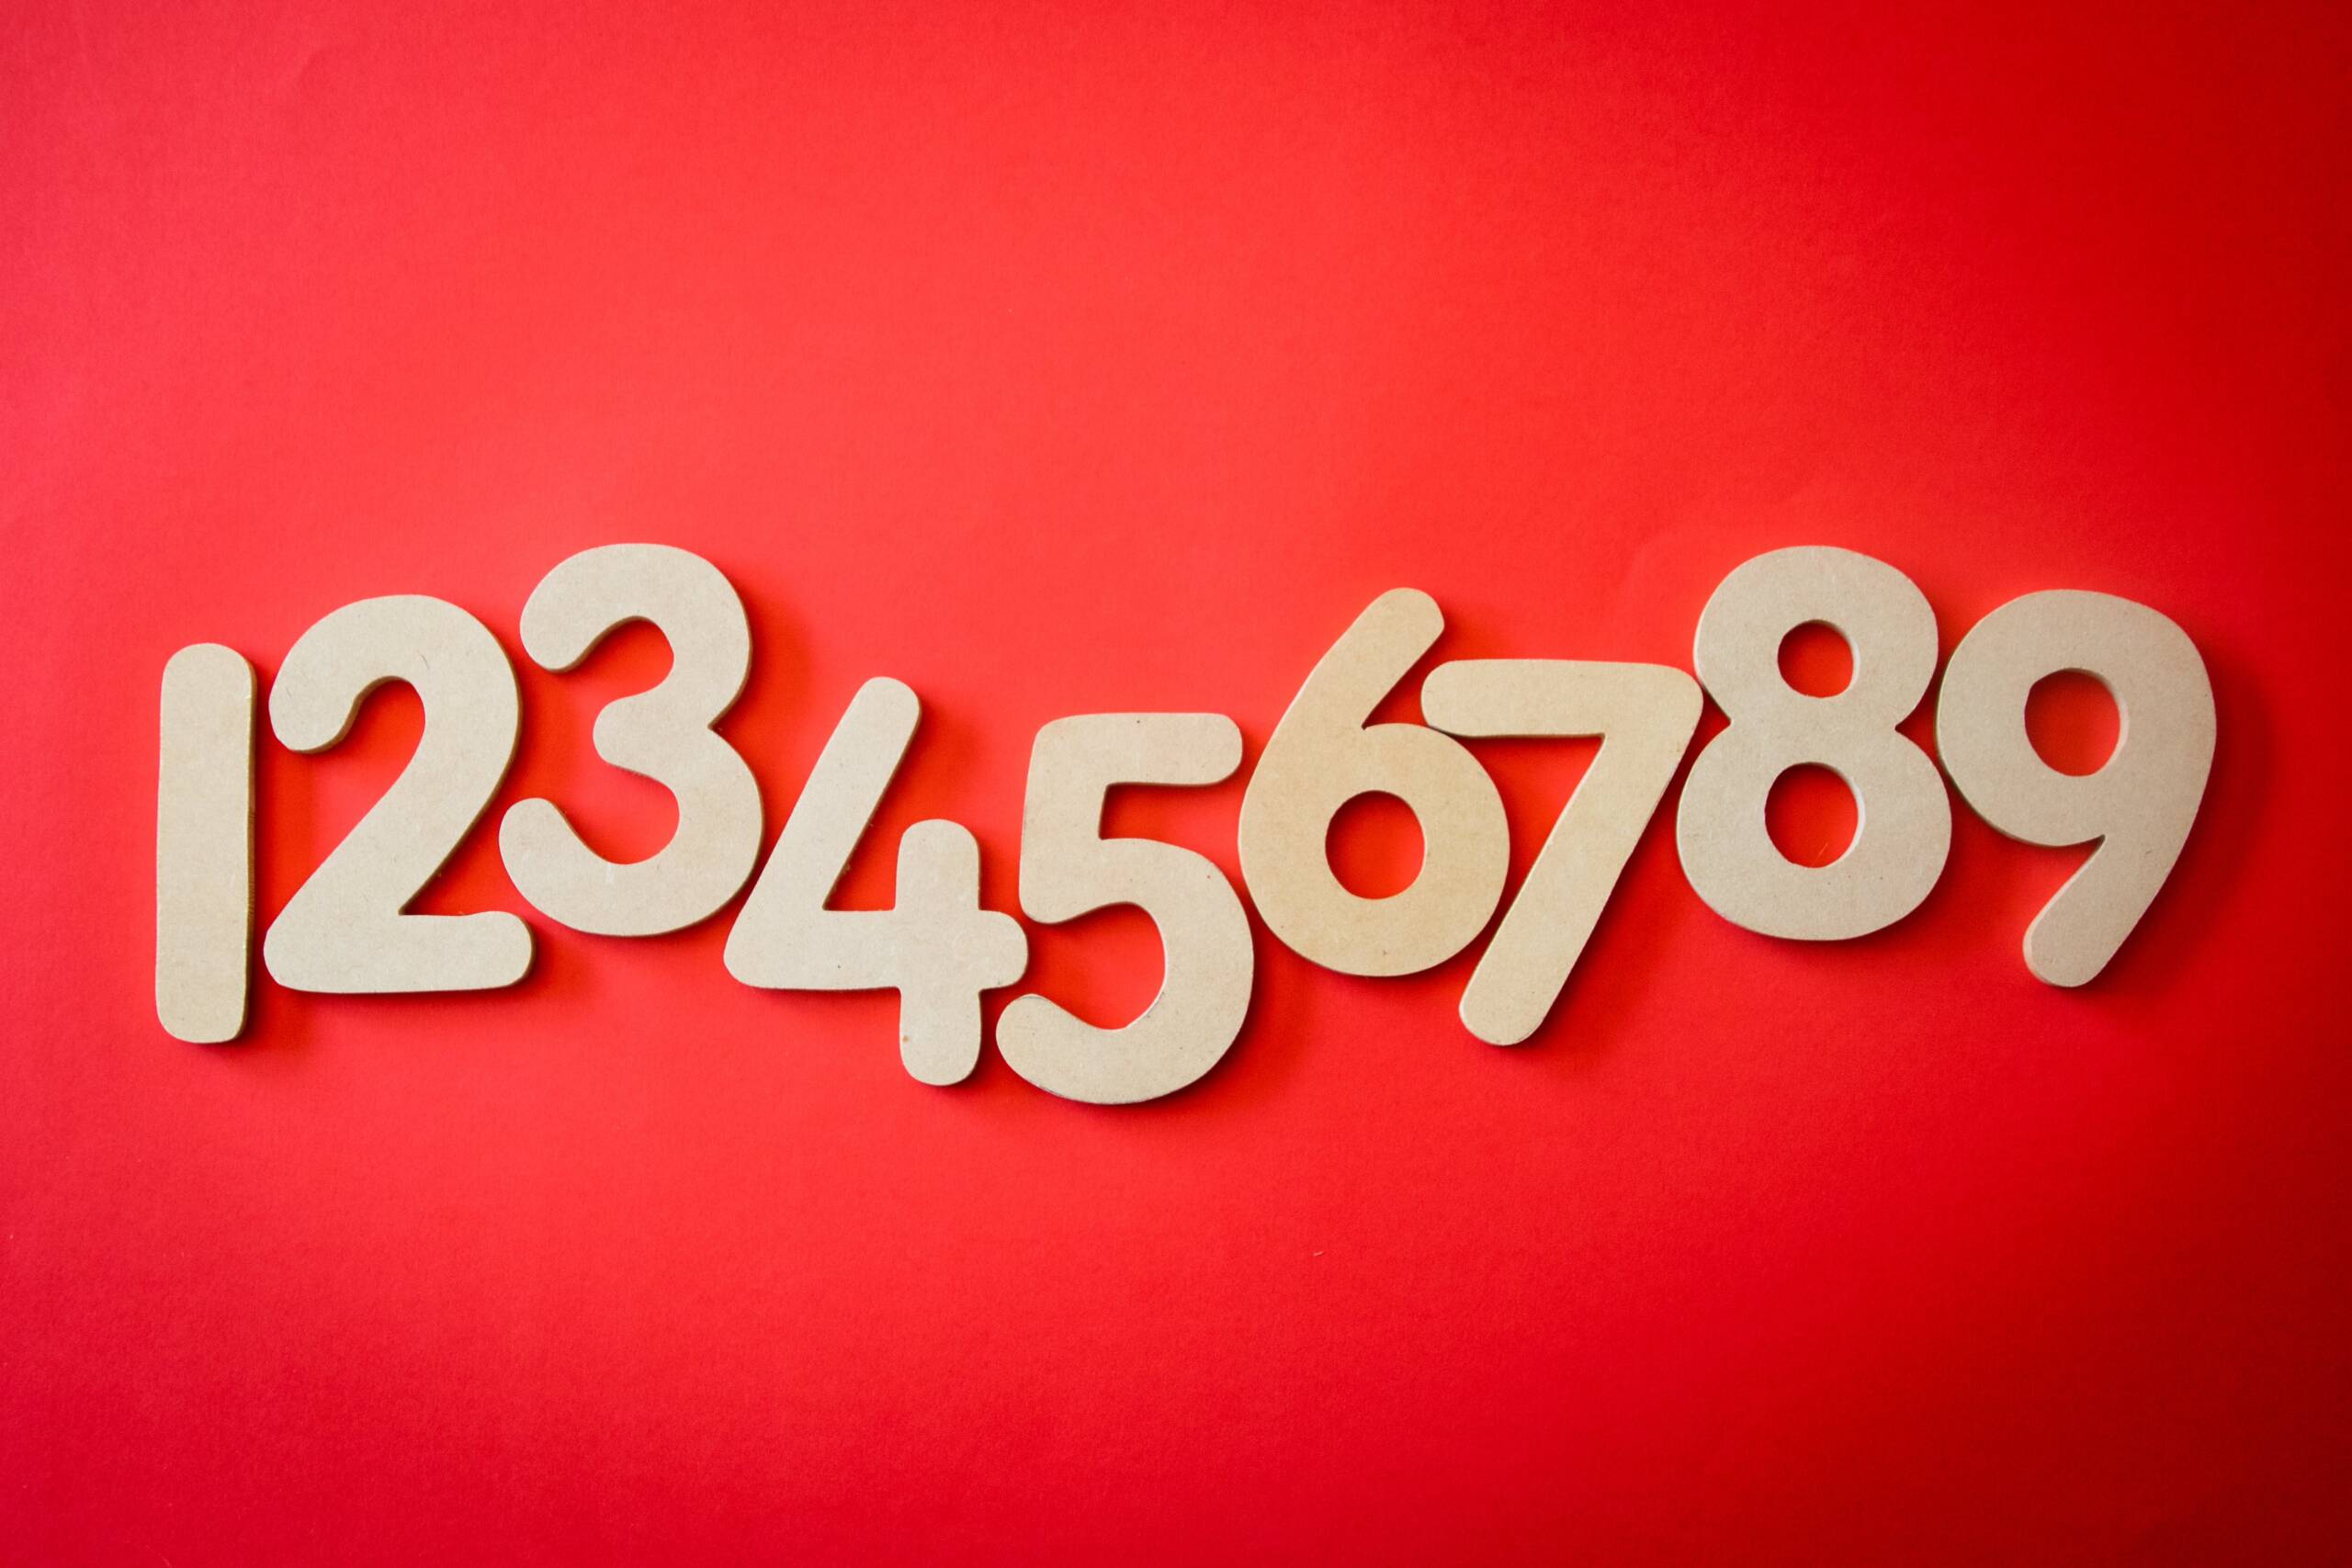 The numbers 1 through 9 shown on a red background